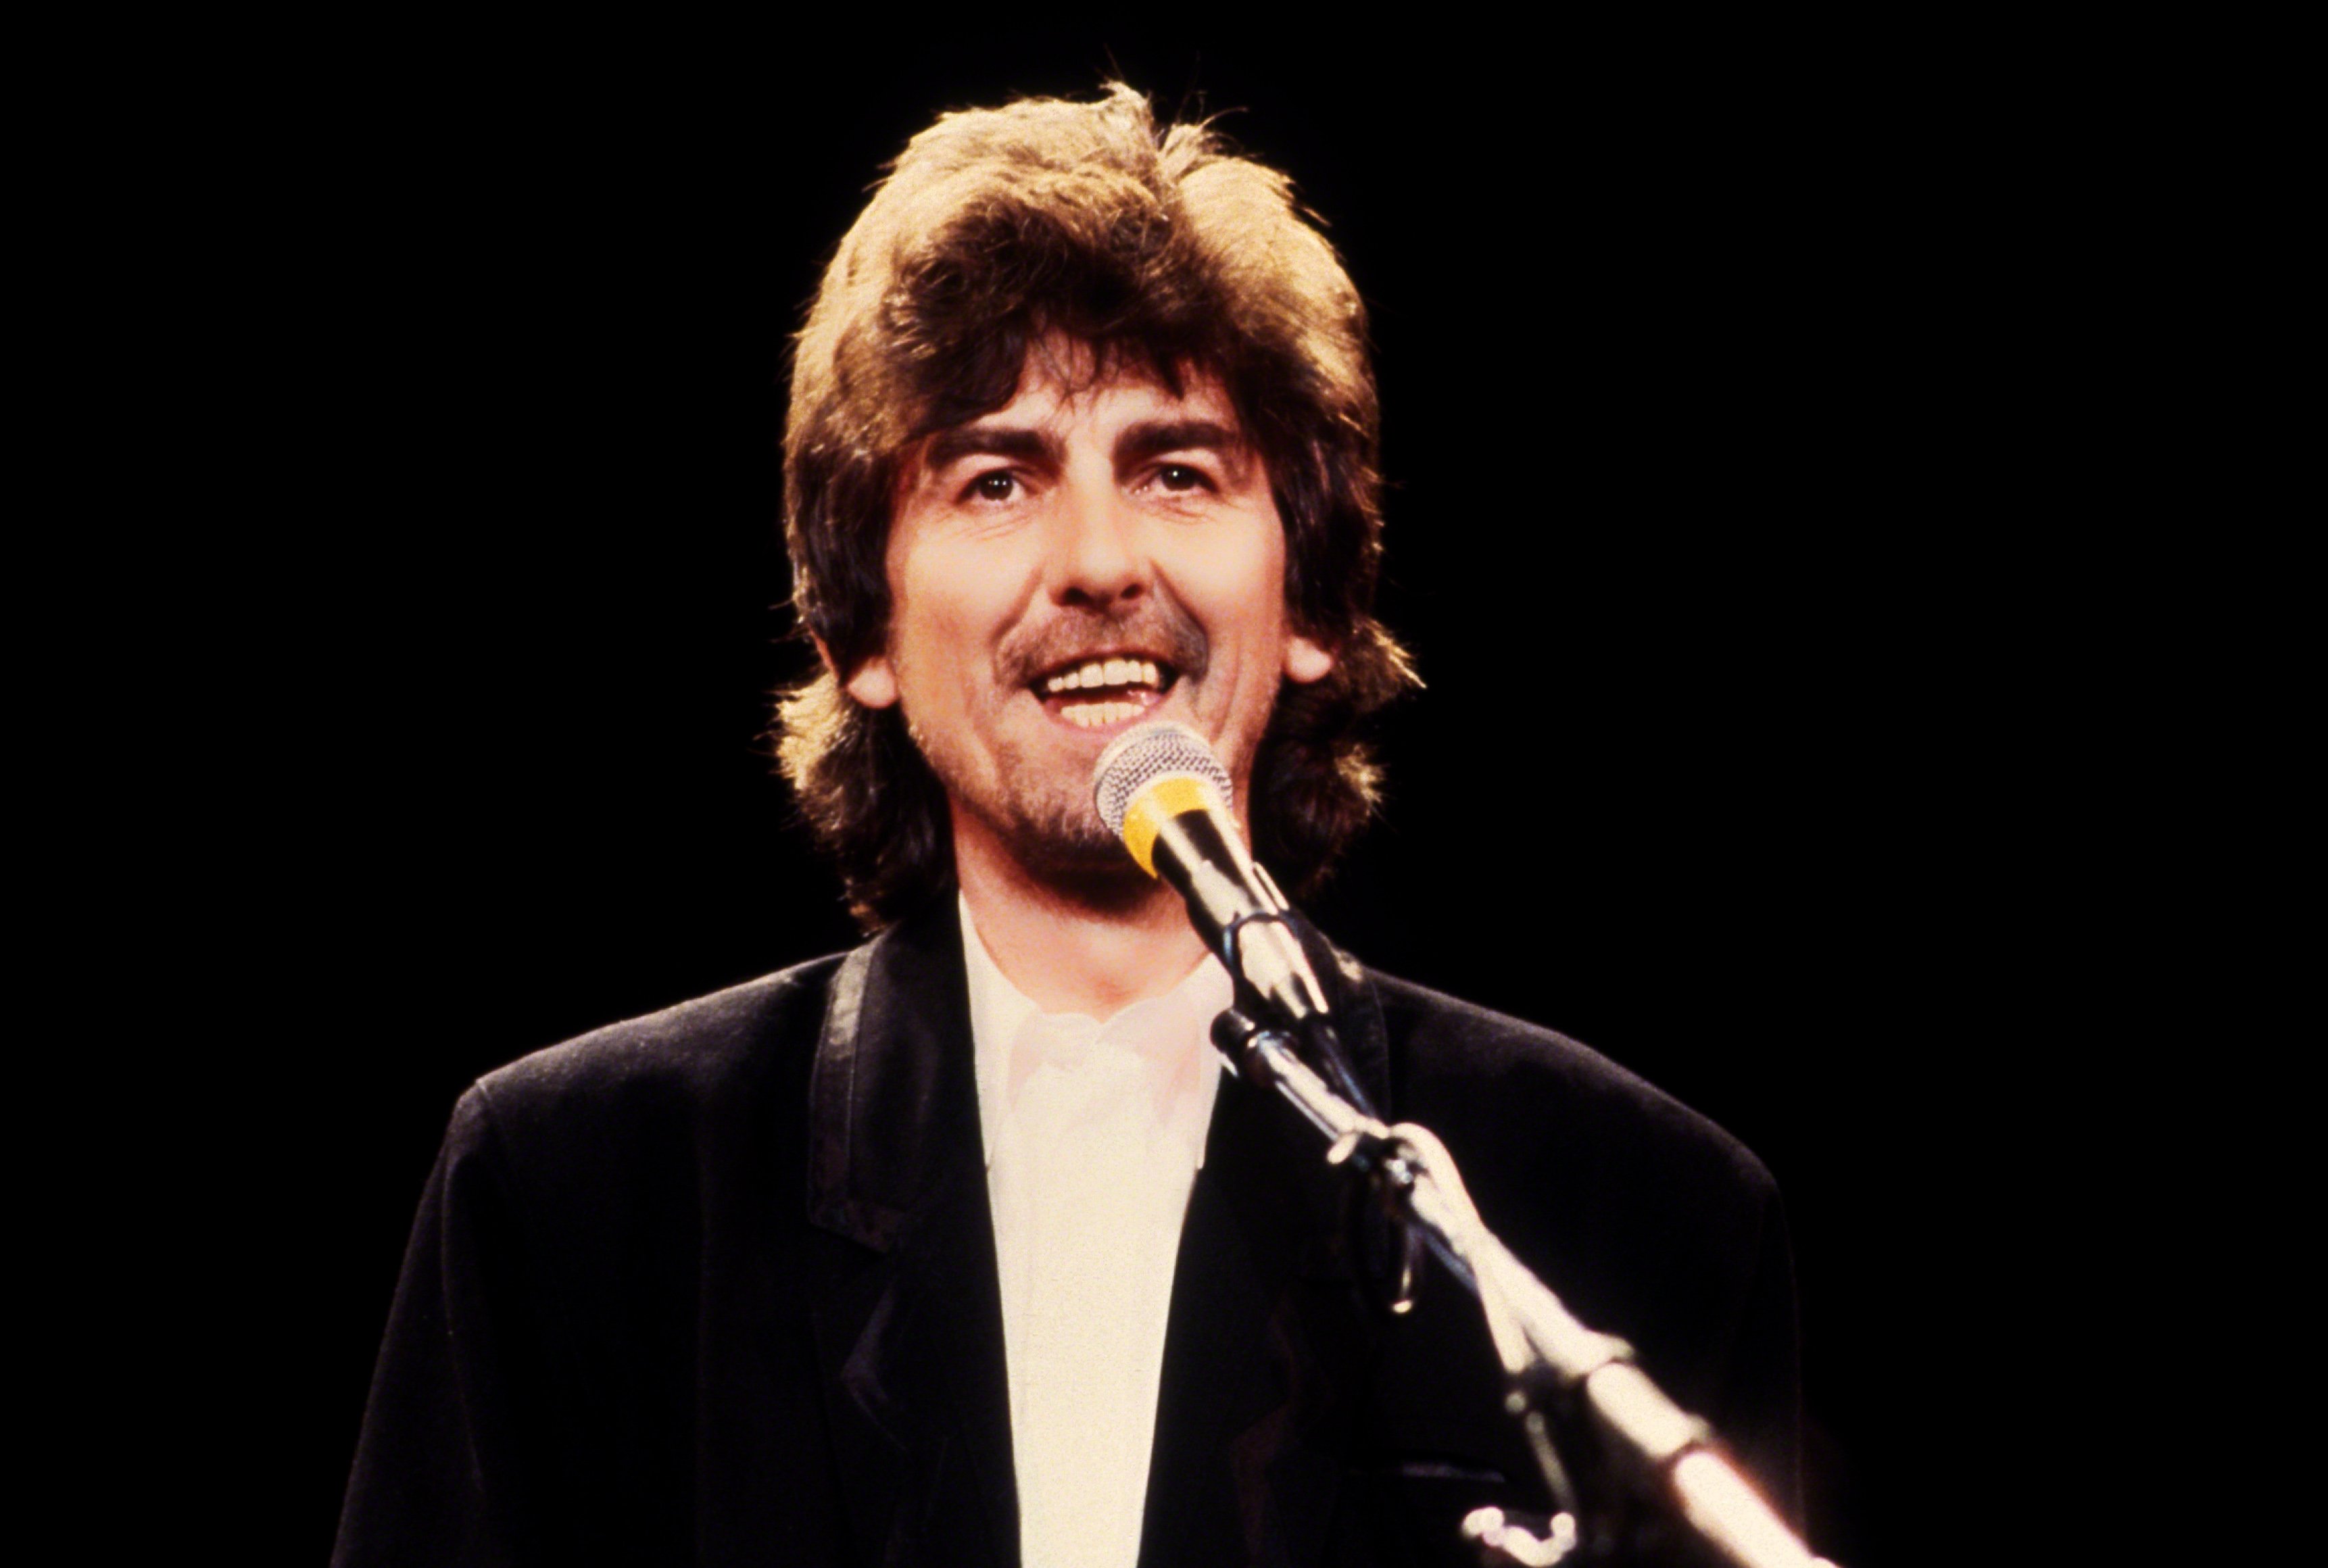 George Harrison speaks at the Rock n' Roll Hall of Fame induction ceremony for The Beatles